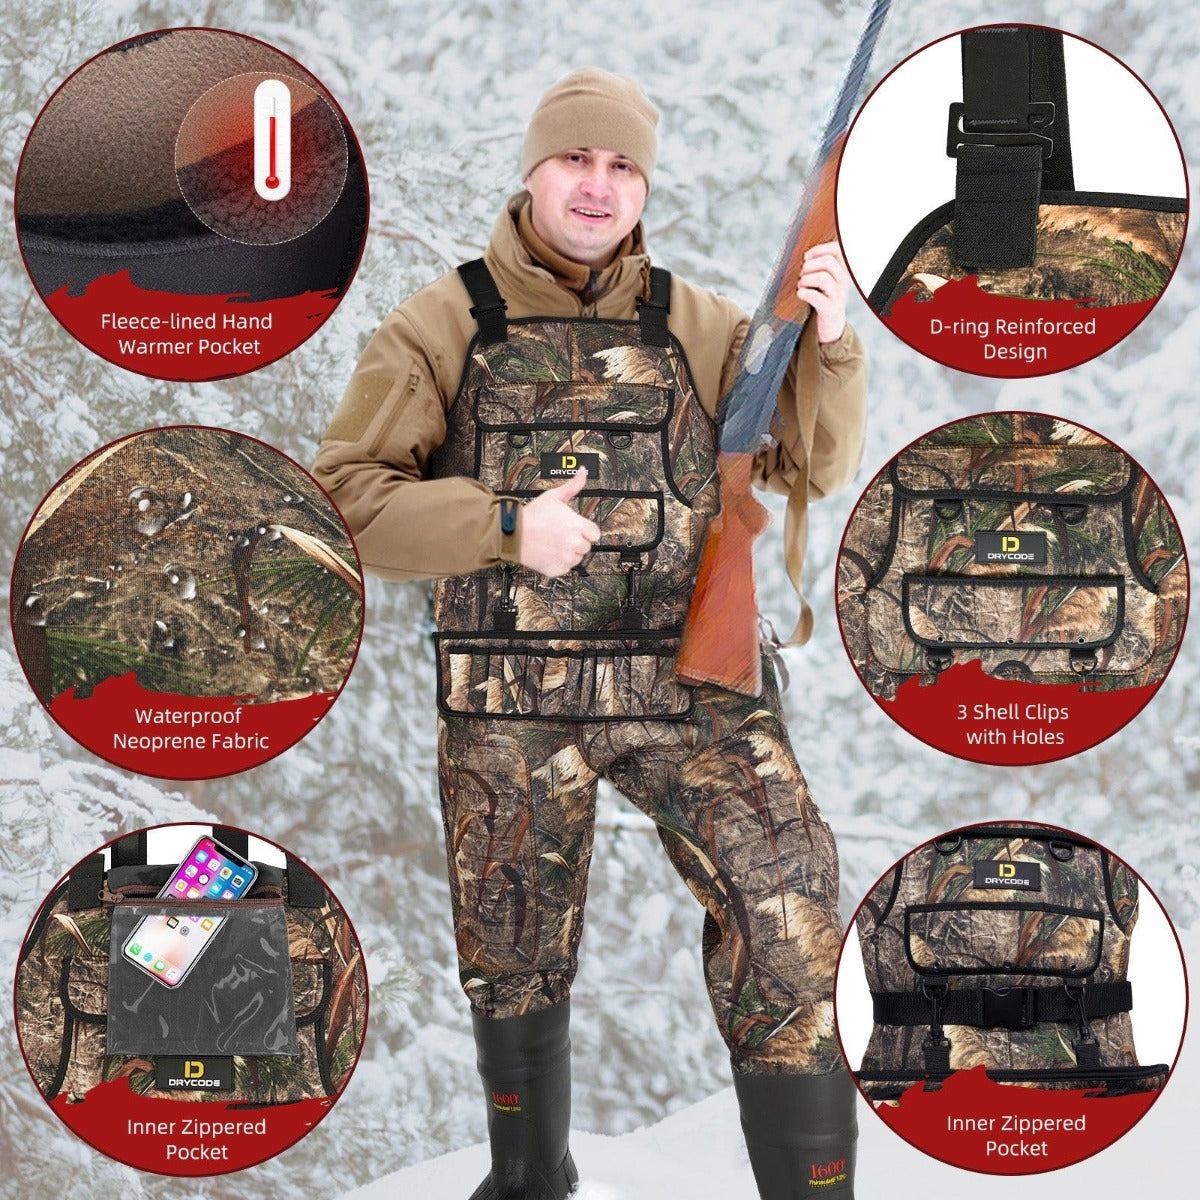  DRYCODE Chest Waders for Men with 1600g Boots